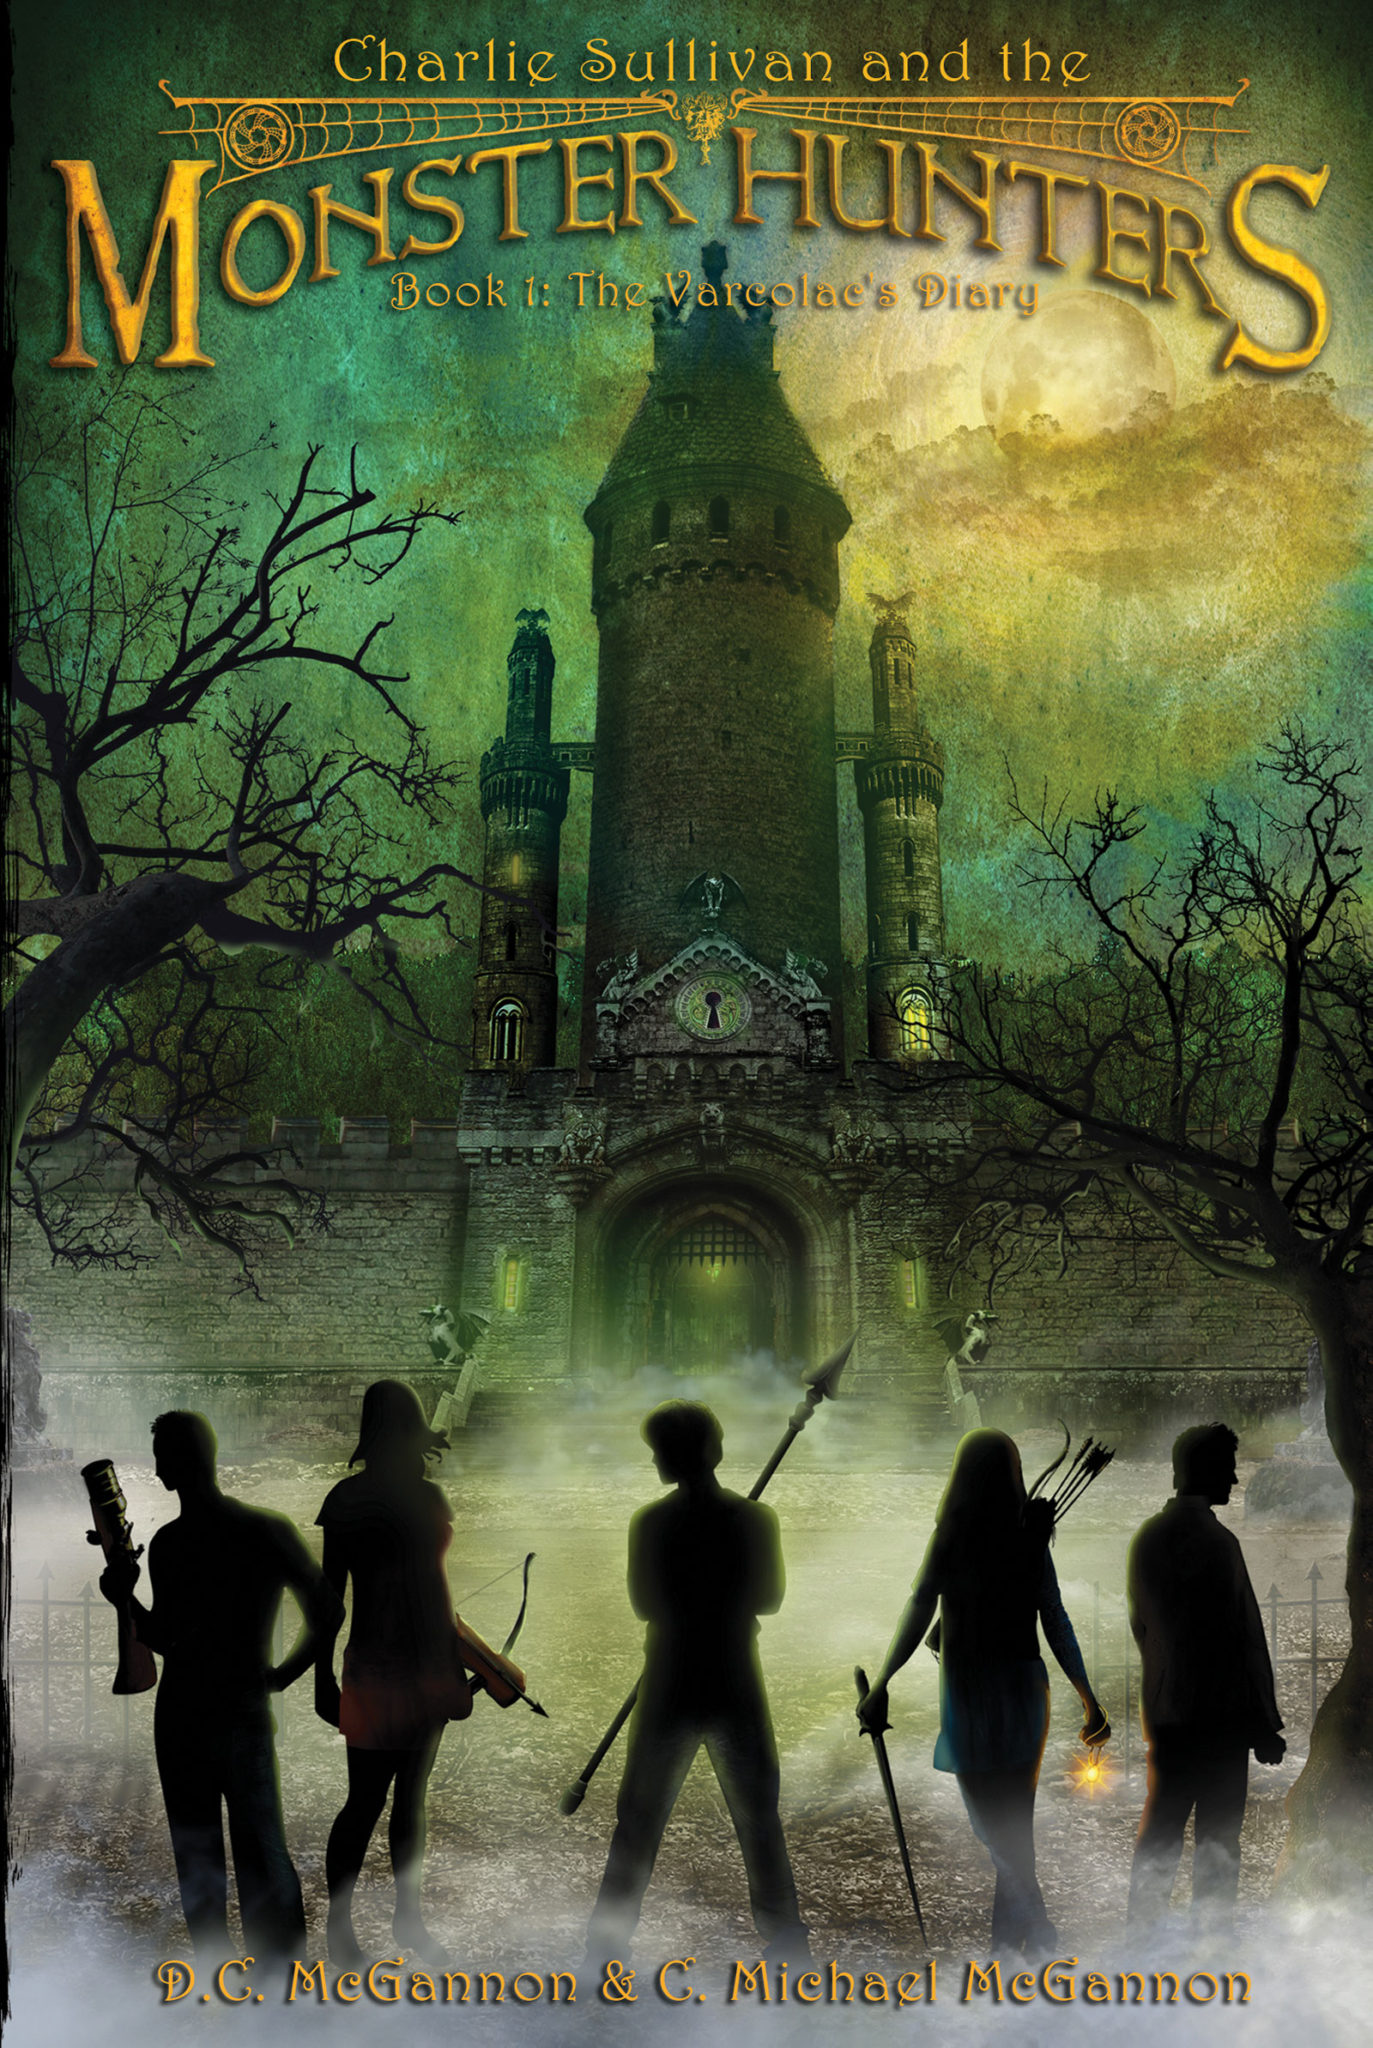 Charlie Sullivan and the Monster Hunters: The Varcolac’s Diary (Book 1) by D.C. McGannon & C. Michael McGannon